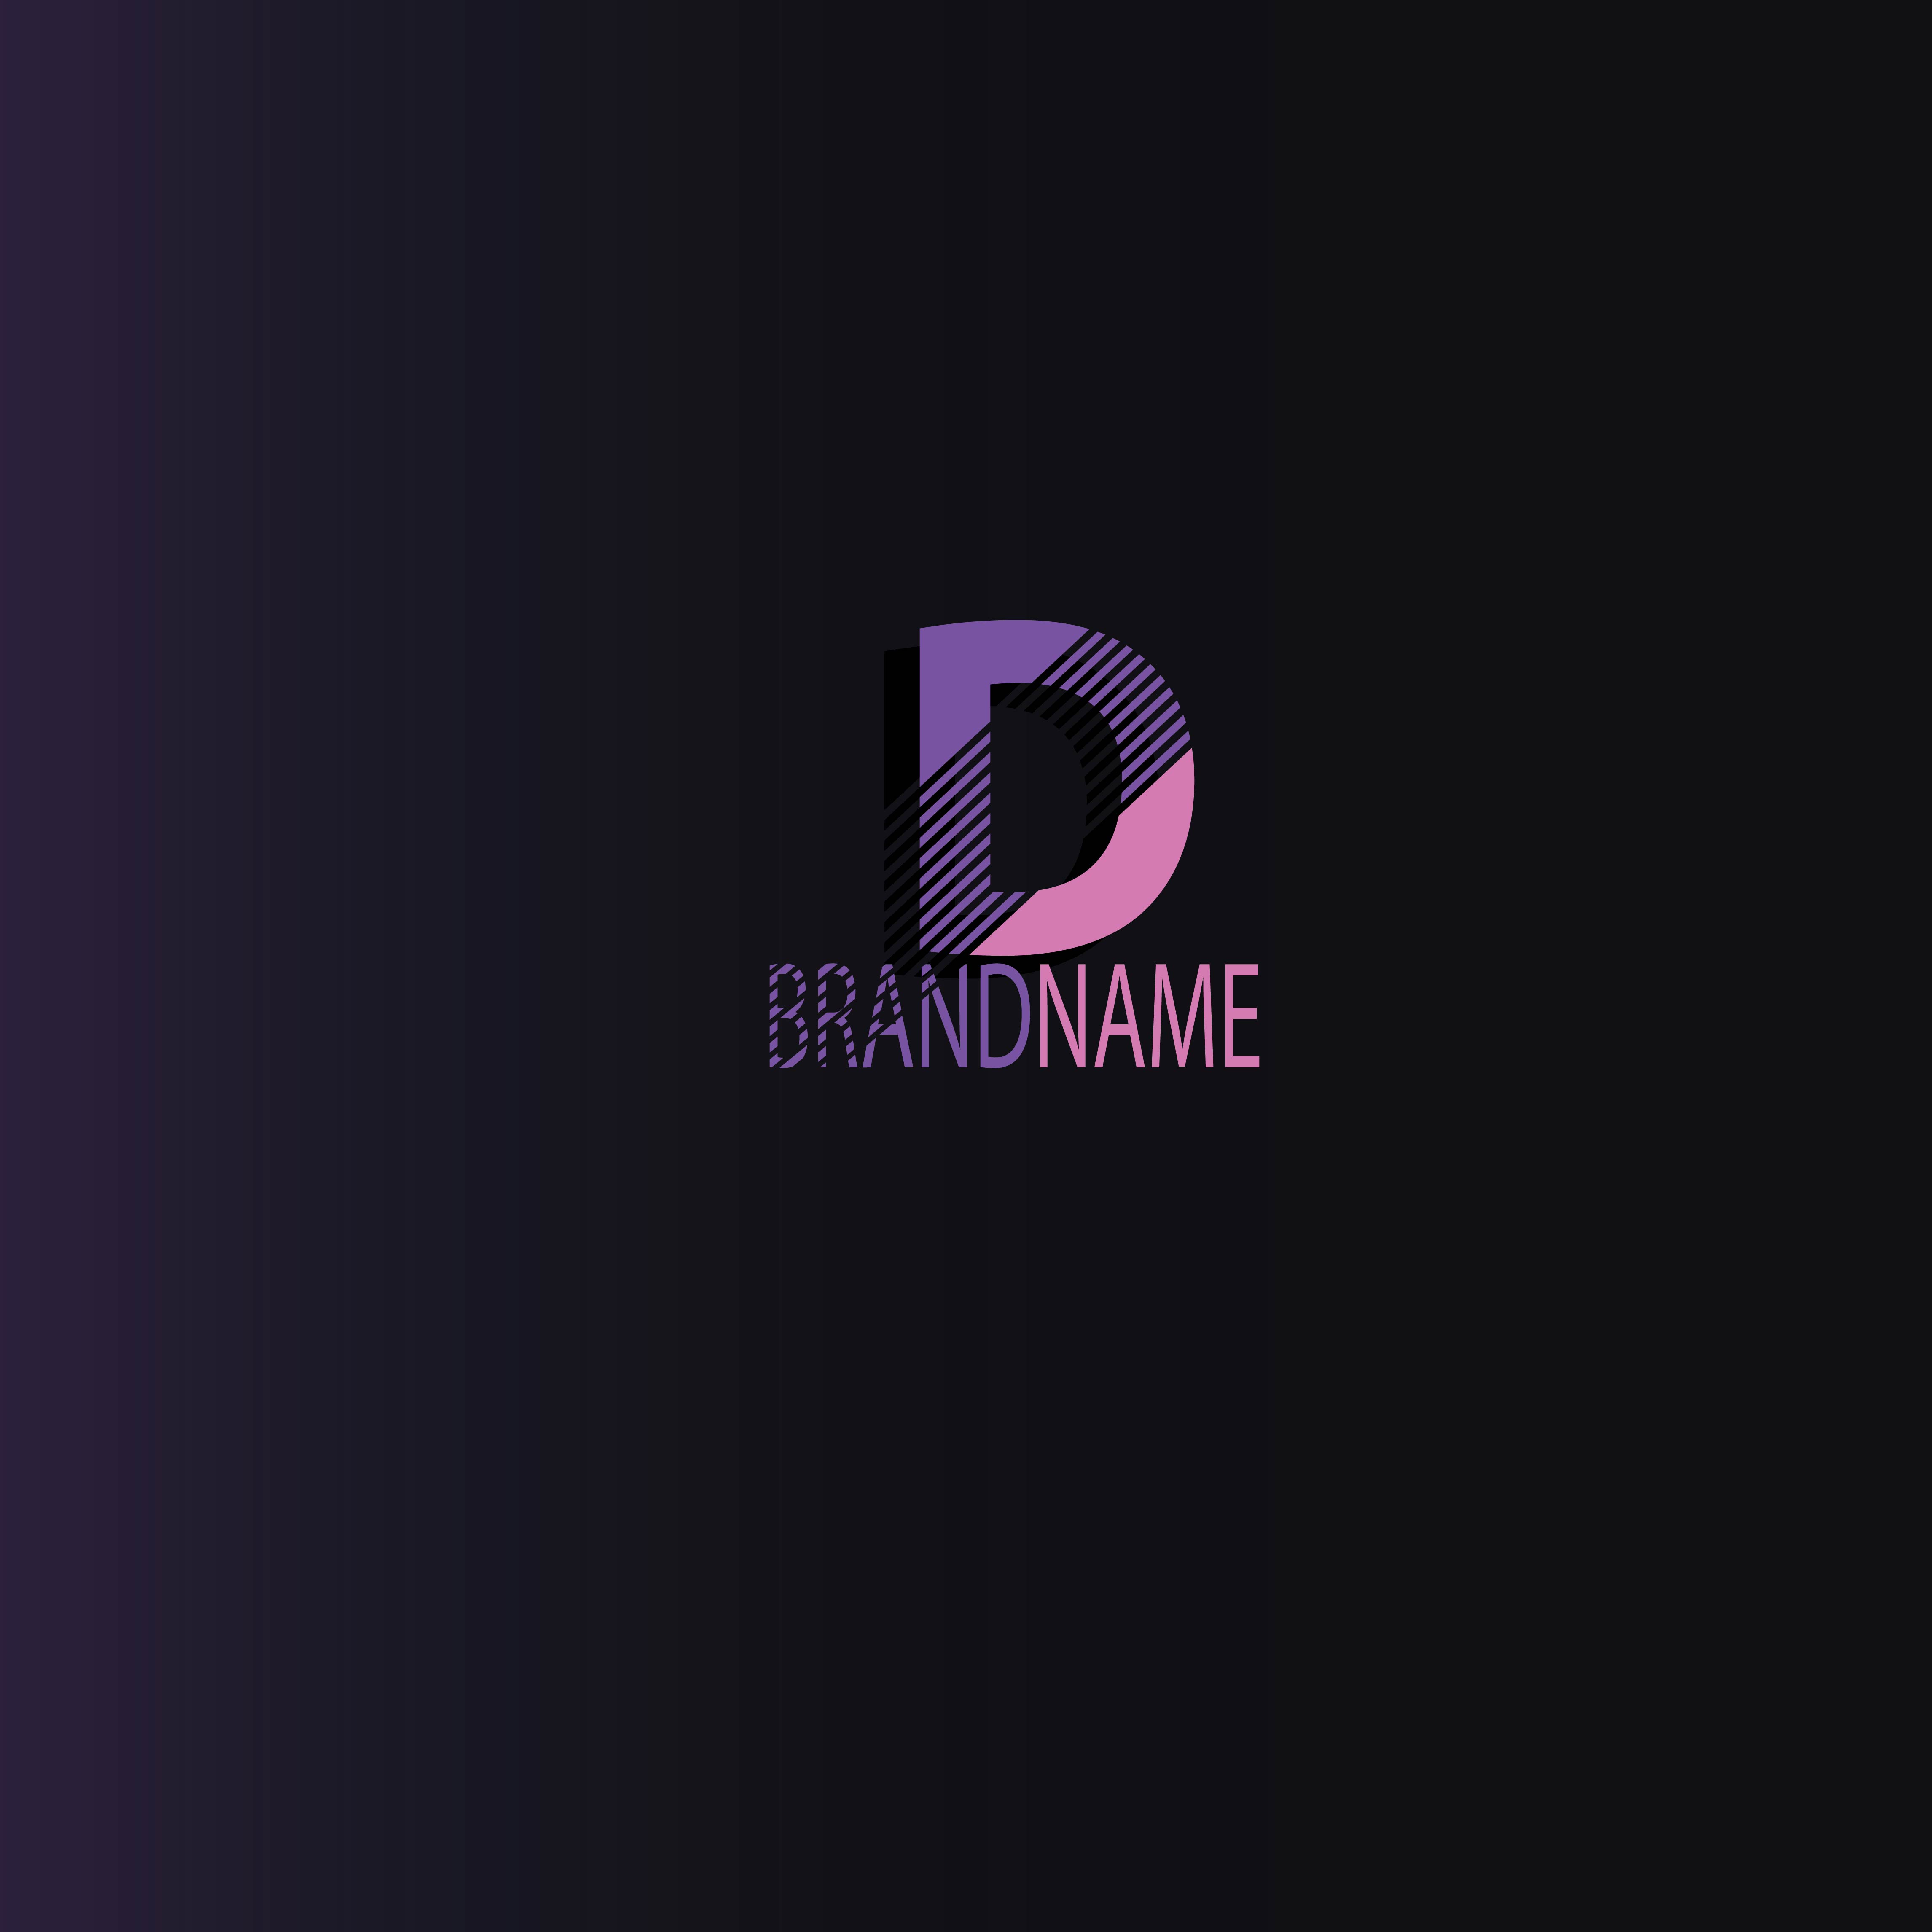 Black and purple logo with the letter d.